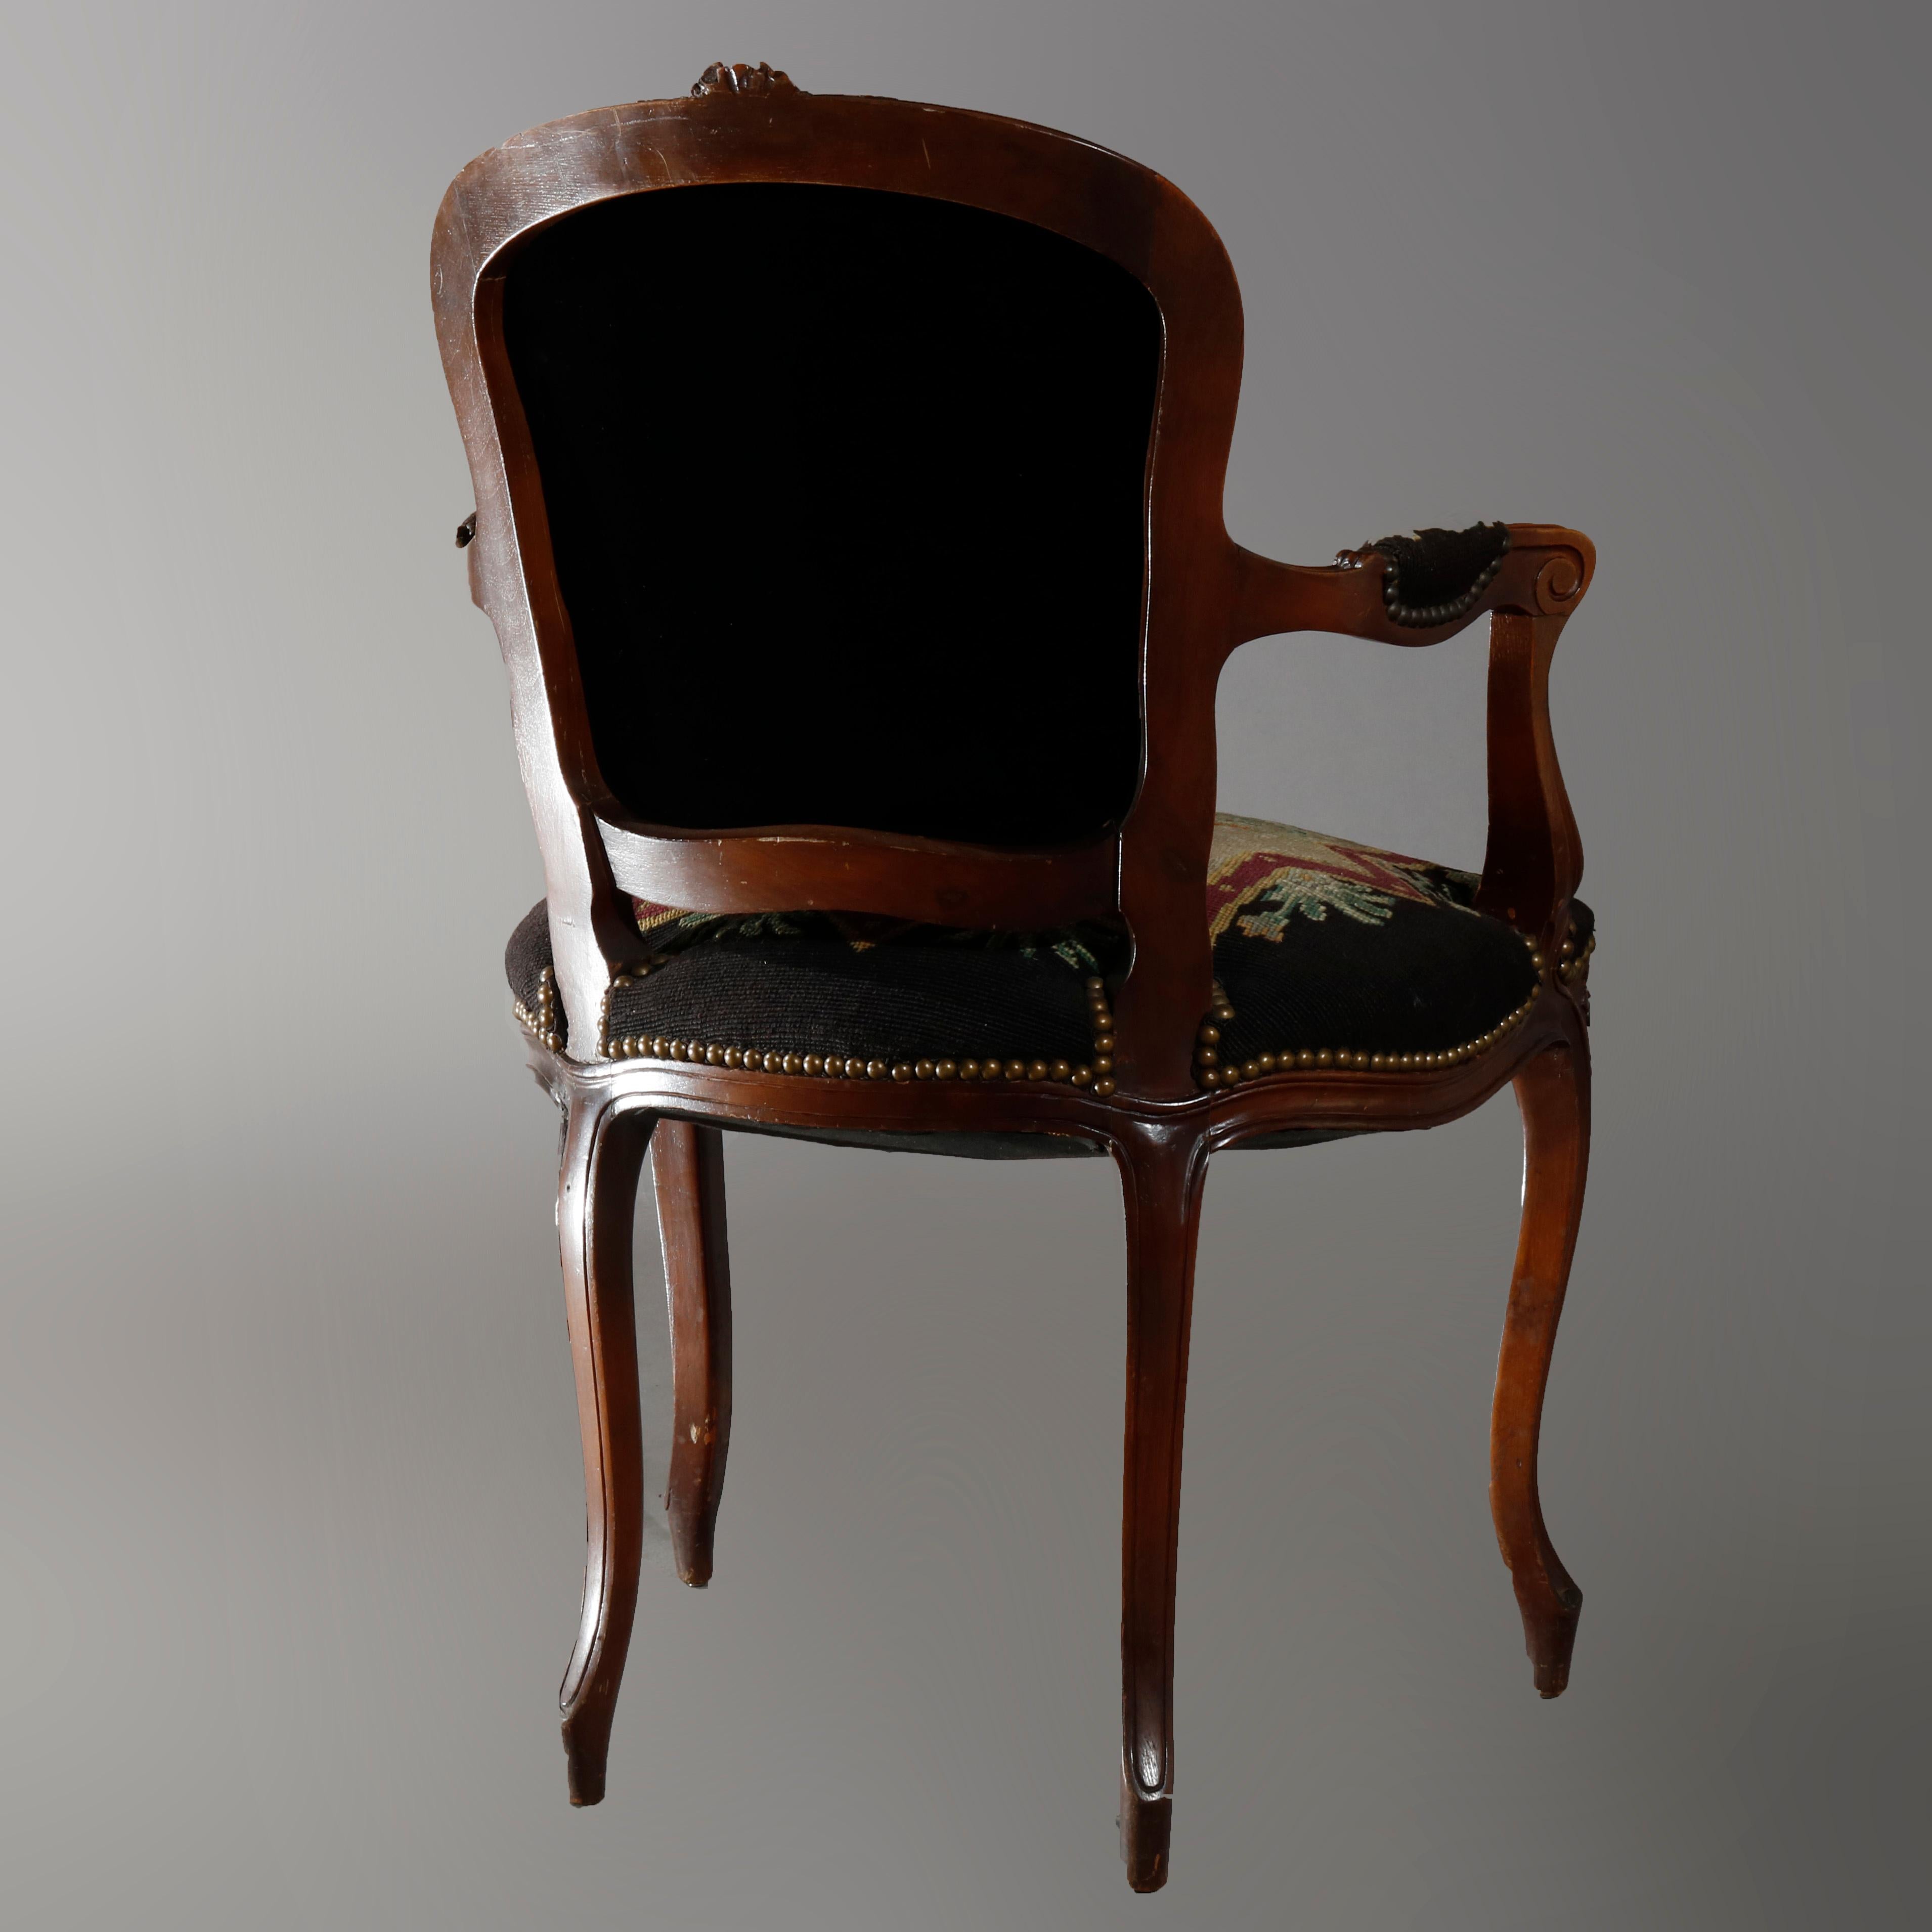 Carved Antique French Louis XIV Needlepoint Fauteuil Armchair, circa 1920